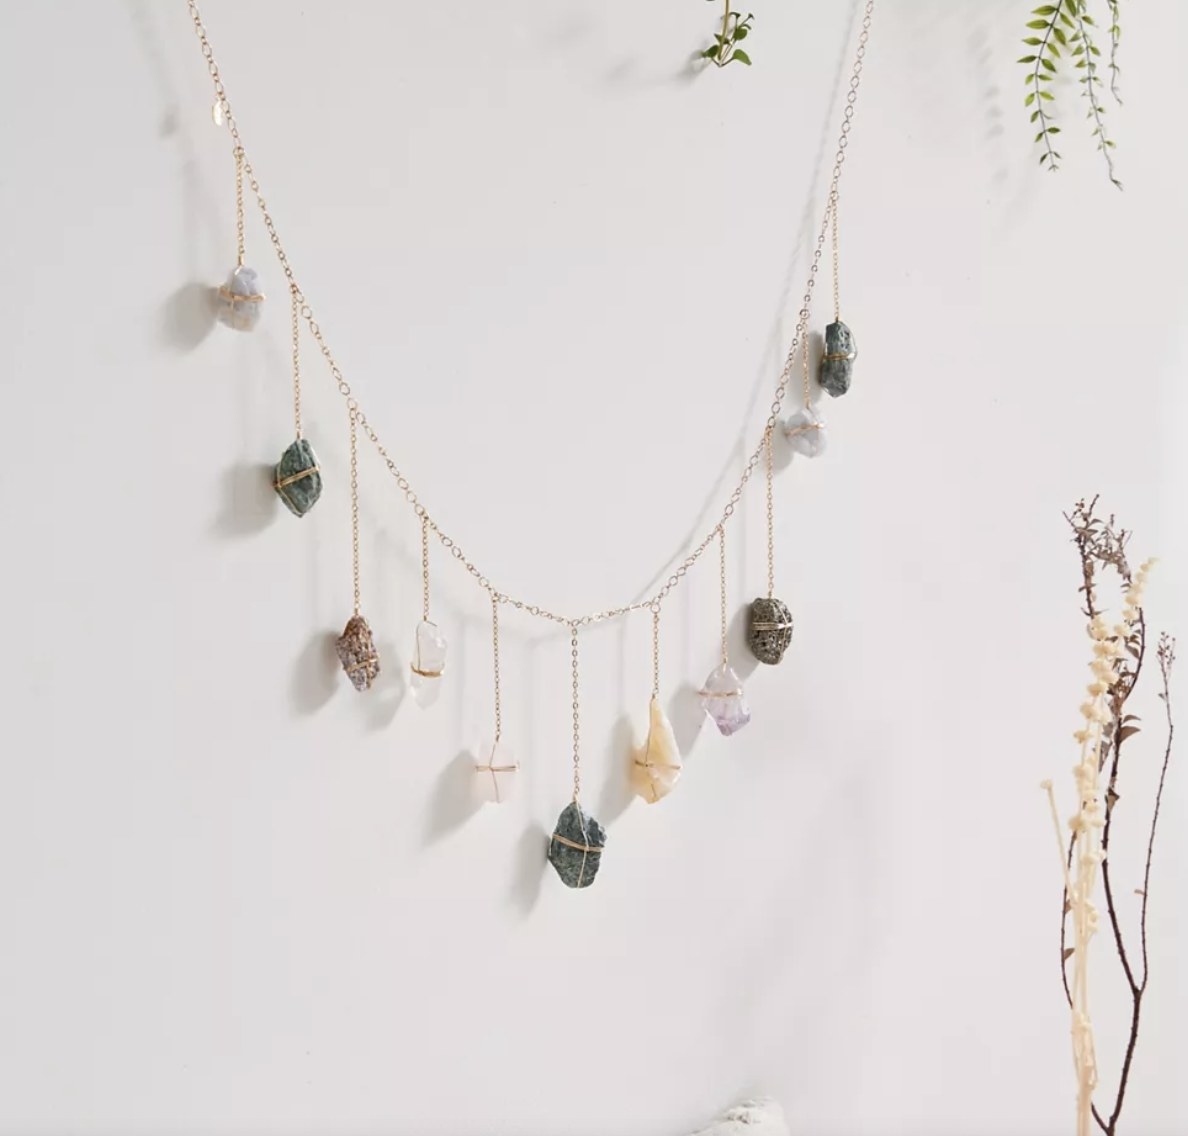 A garland of crystals hanging in front of a white wall